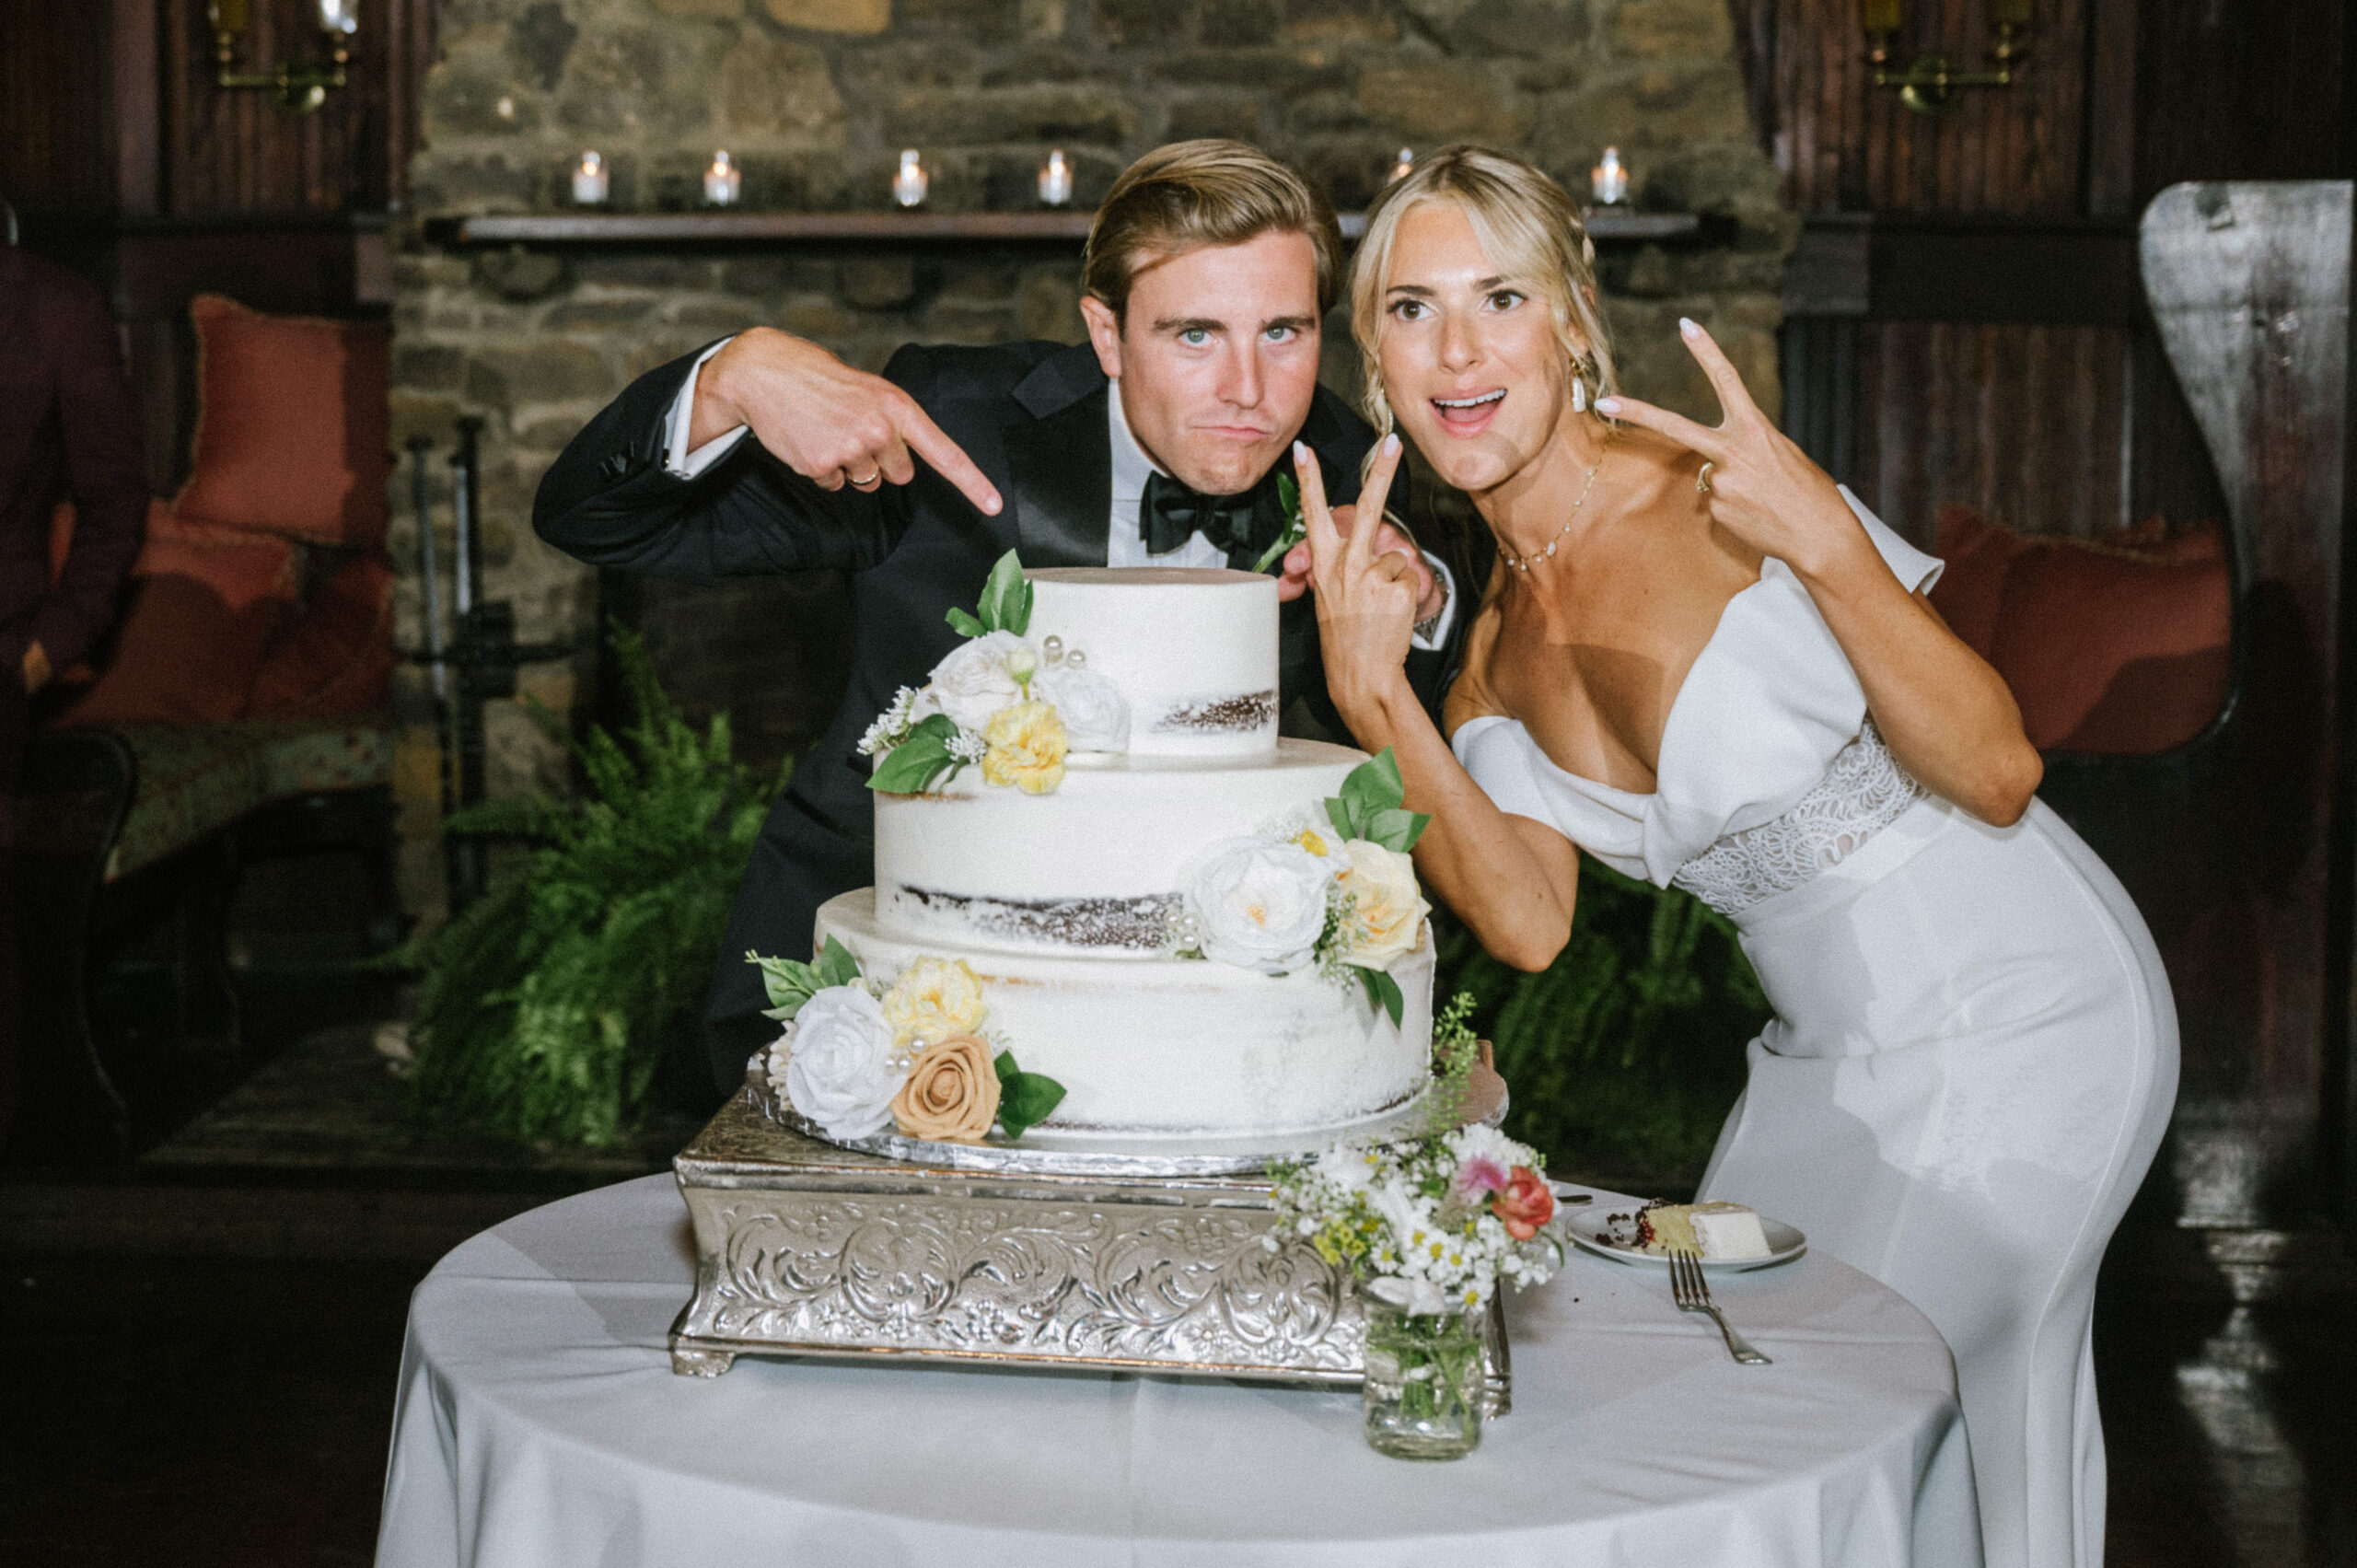 The bride and groom make silly faces and pose with their white wedding cake with yellow, white and green florals at Water Witch Club.